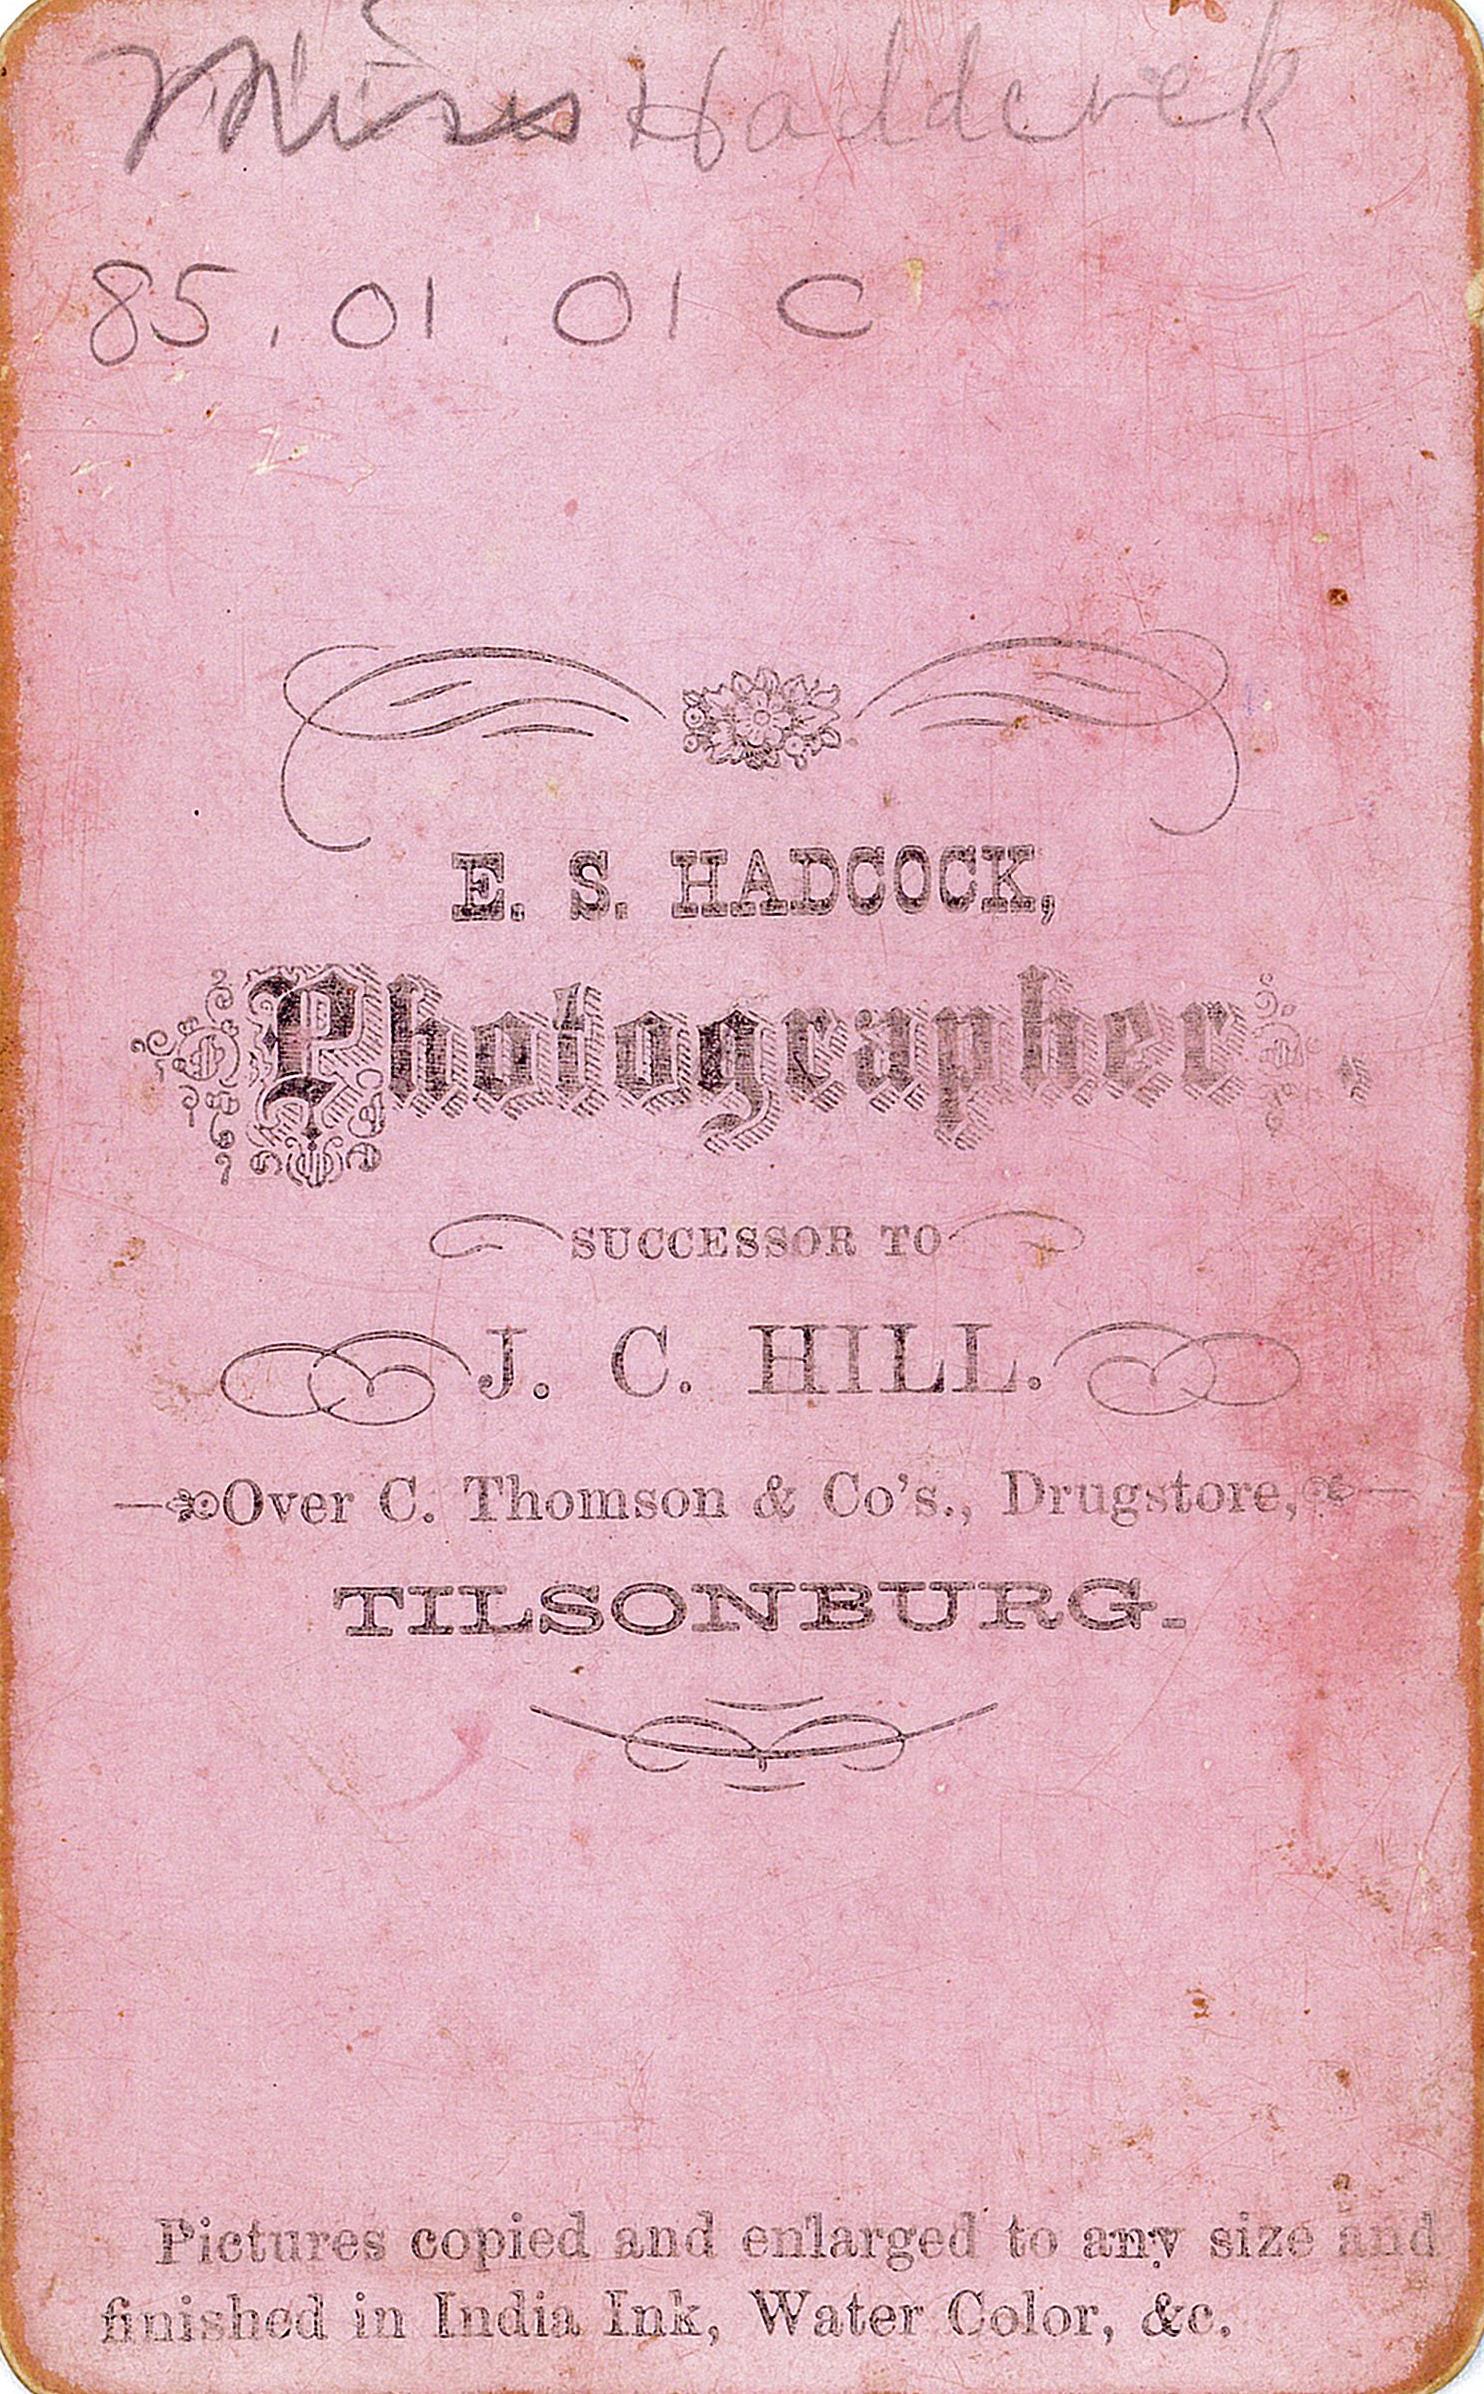 Back of a pink cabinet card from photographer E.S. Hadcock. 